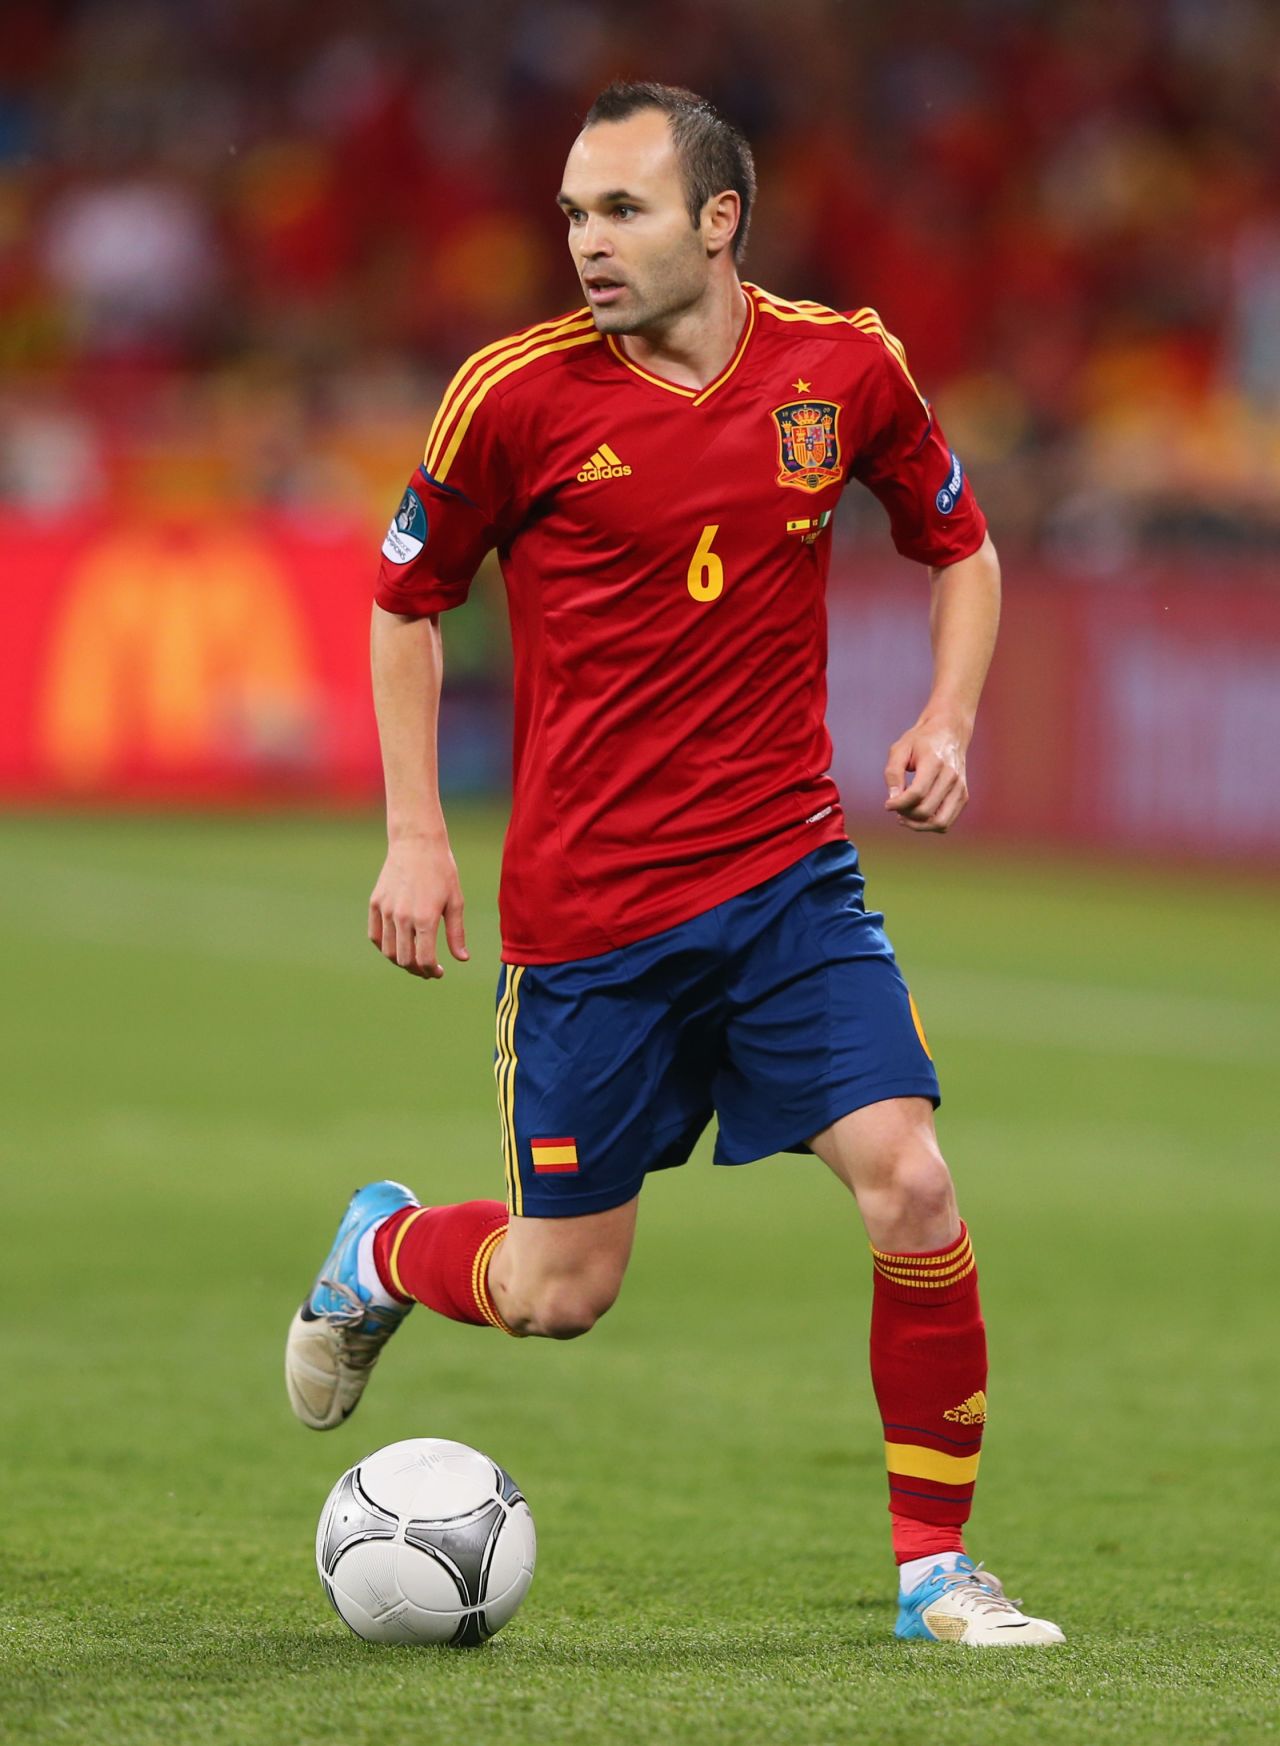 Spain is hoping to become the third country to retain the World Cup. Italy won the tournament in 1934 and 1938, while Brazil triumphed in 1958 and 1962. Andres Iniesta scored the winning goal in the 2010 final.